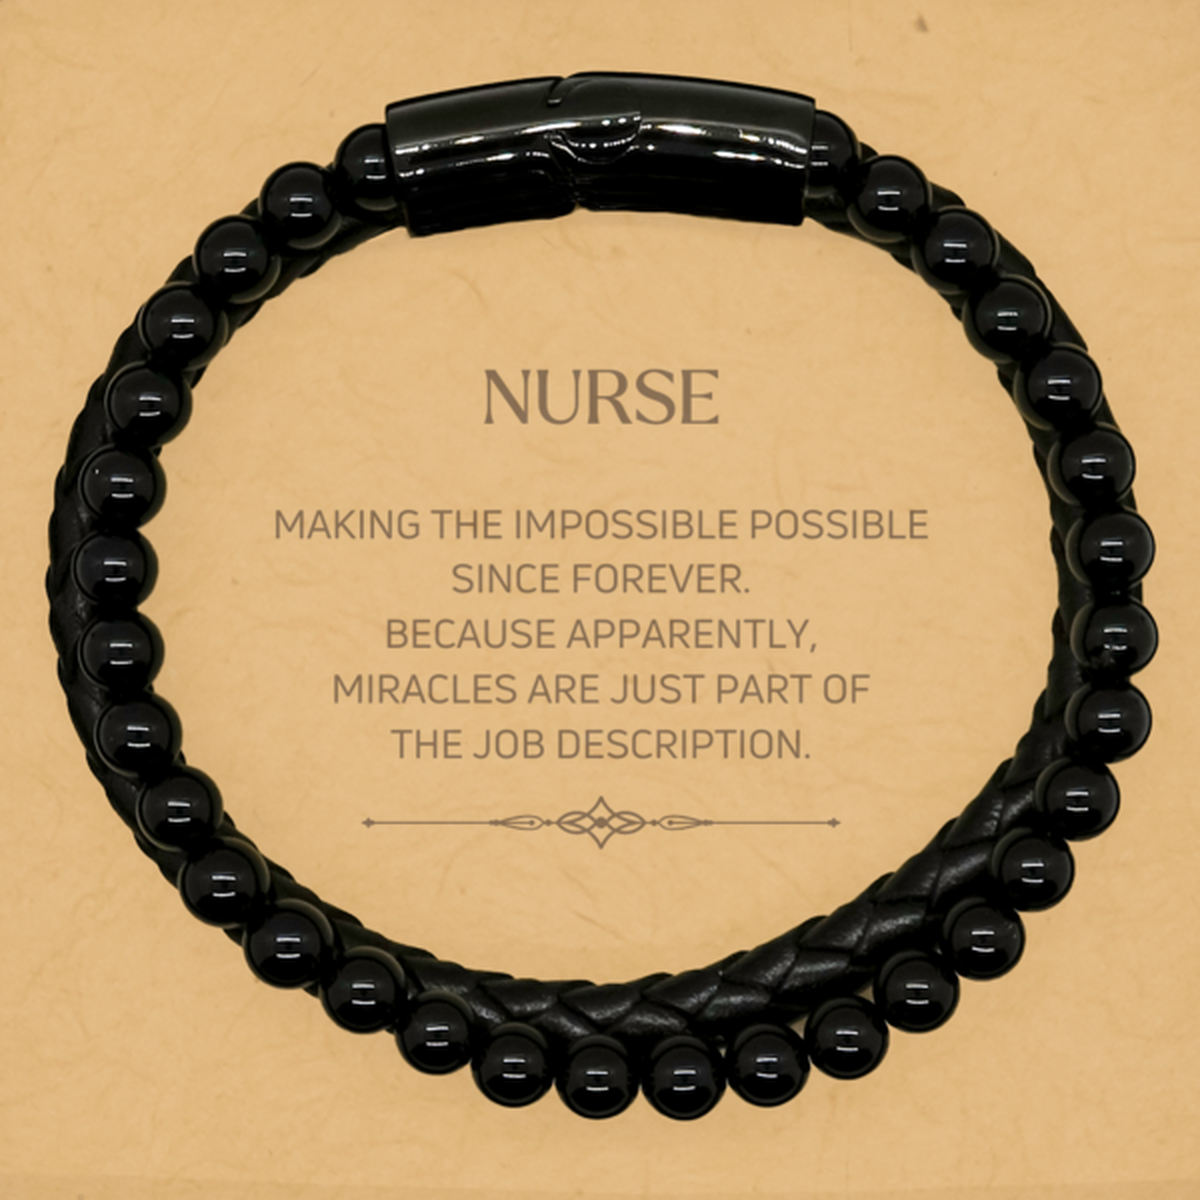 Funny Nurse Gifts, Miracles are just part of the job description, Inspirational Birthday Stone Leather Bracelets For Nurse, Men, Women, Coworkers, Friends, Boss